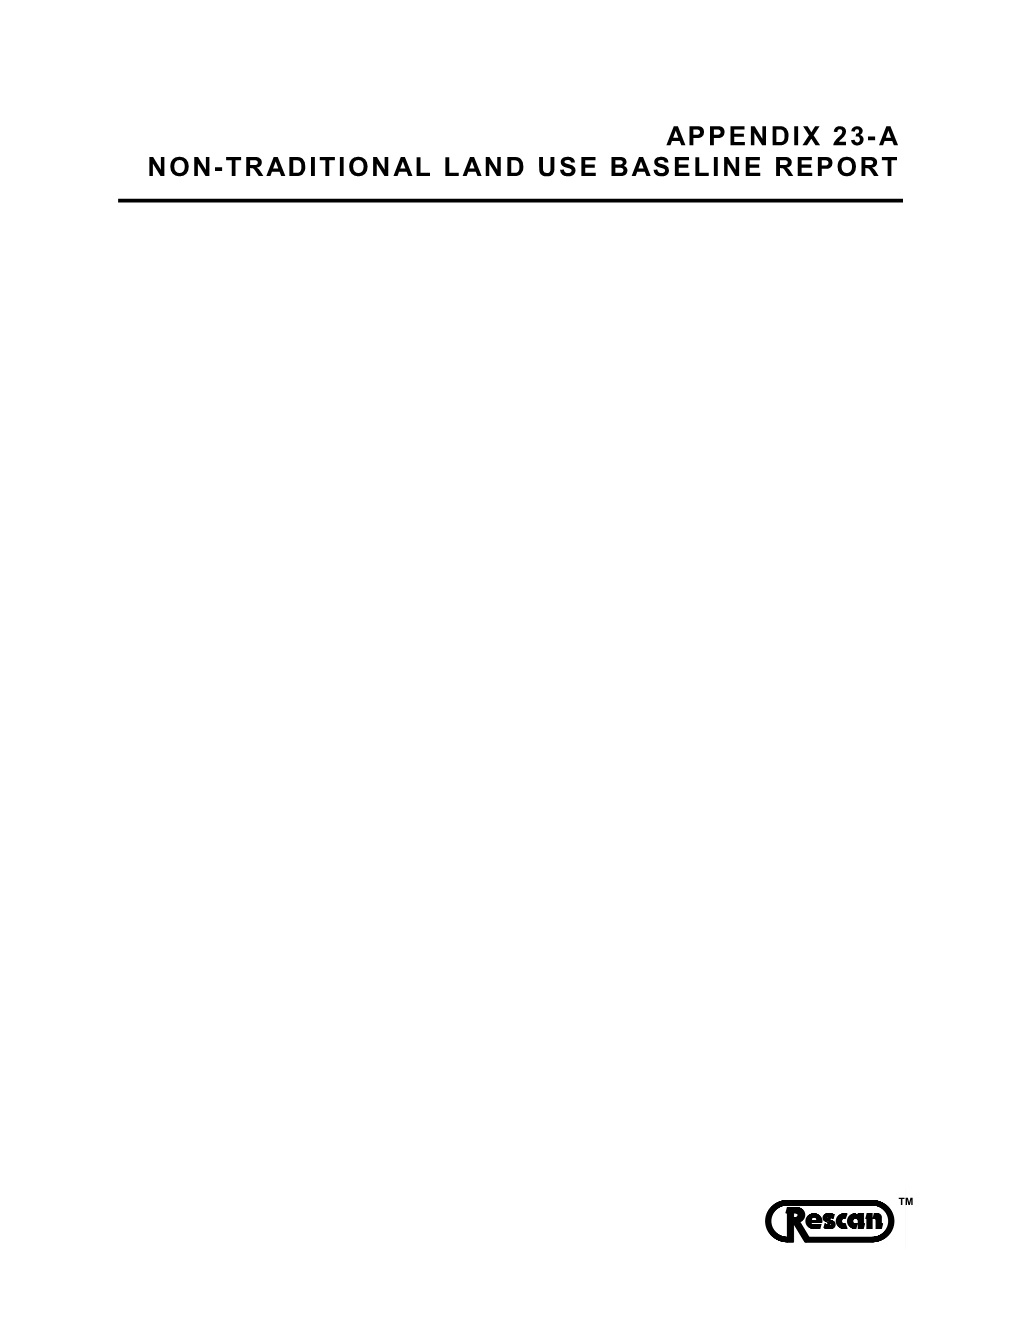 23-A Non-Traditional Land Use Baseline Report